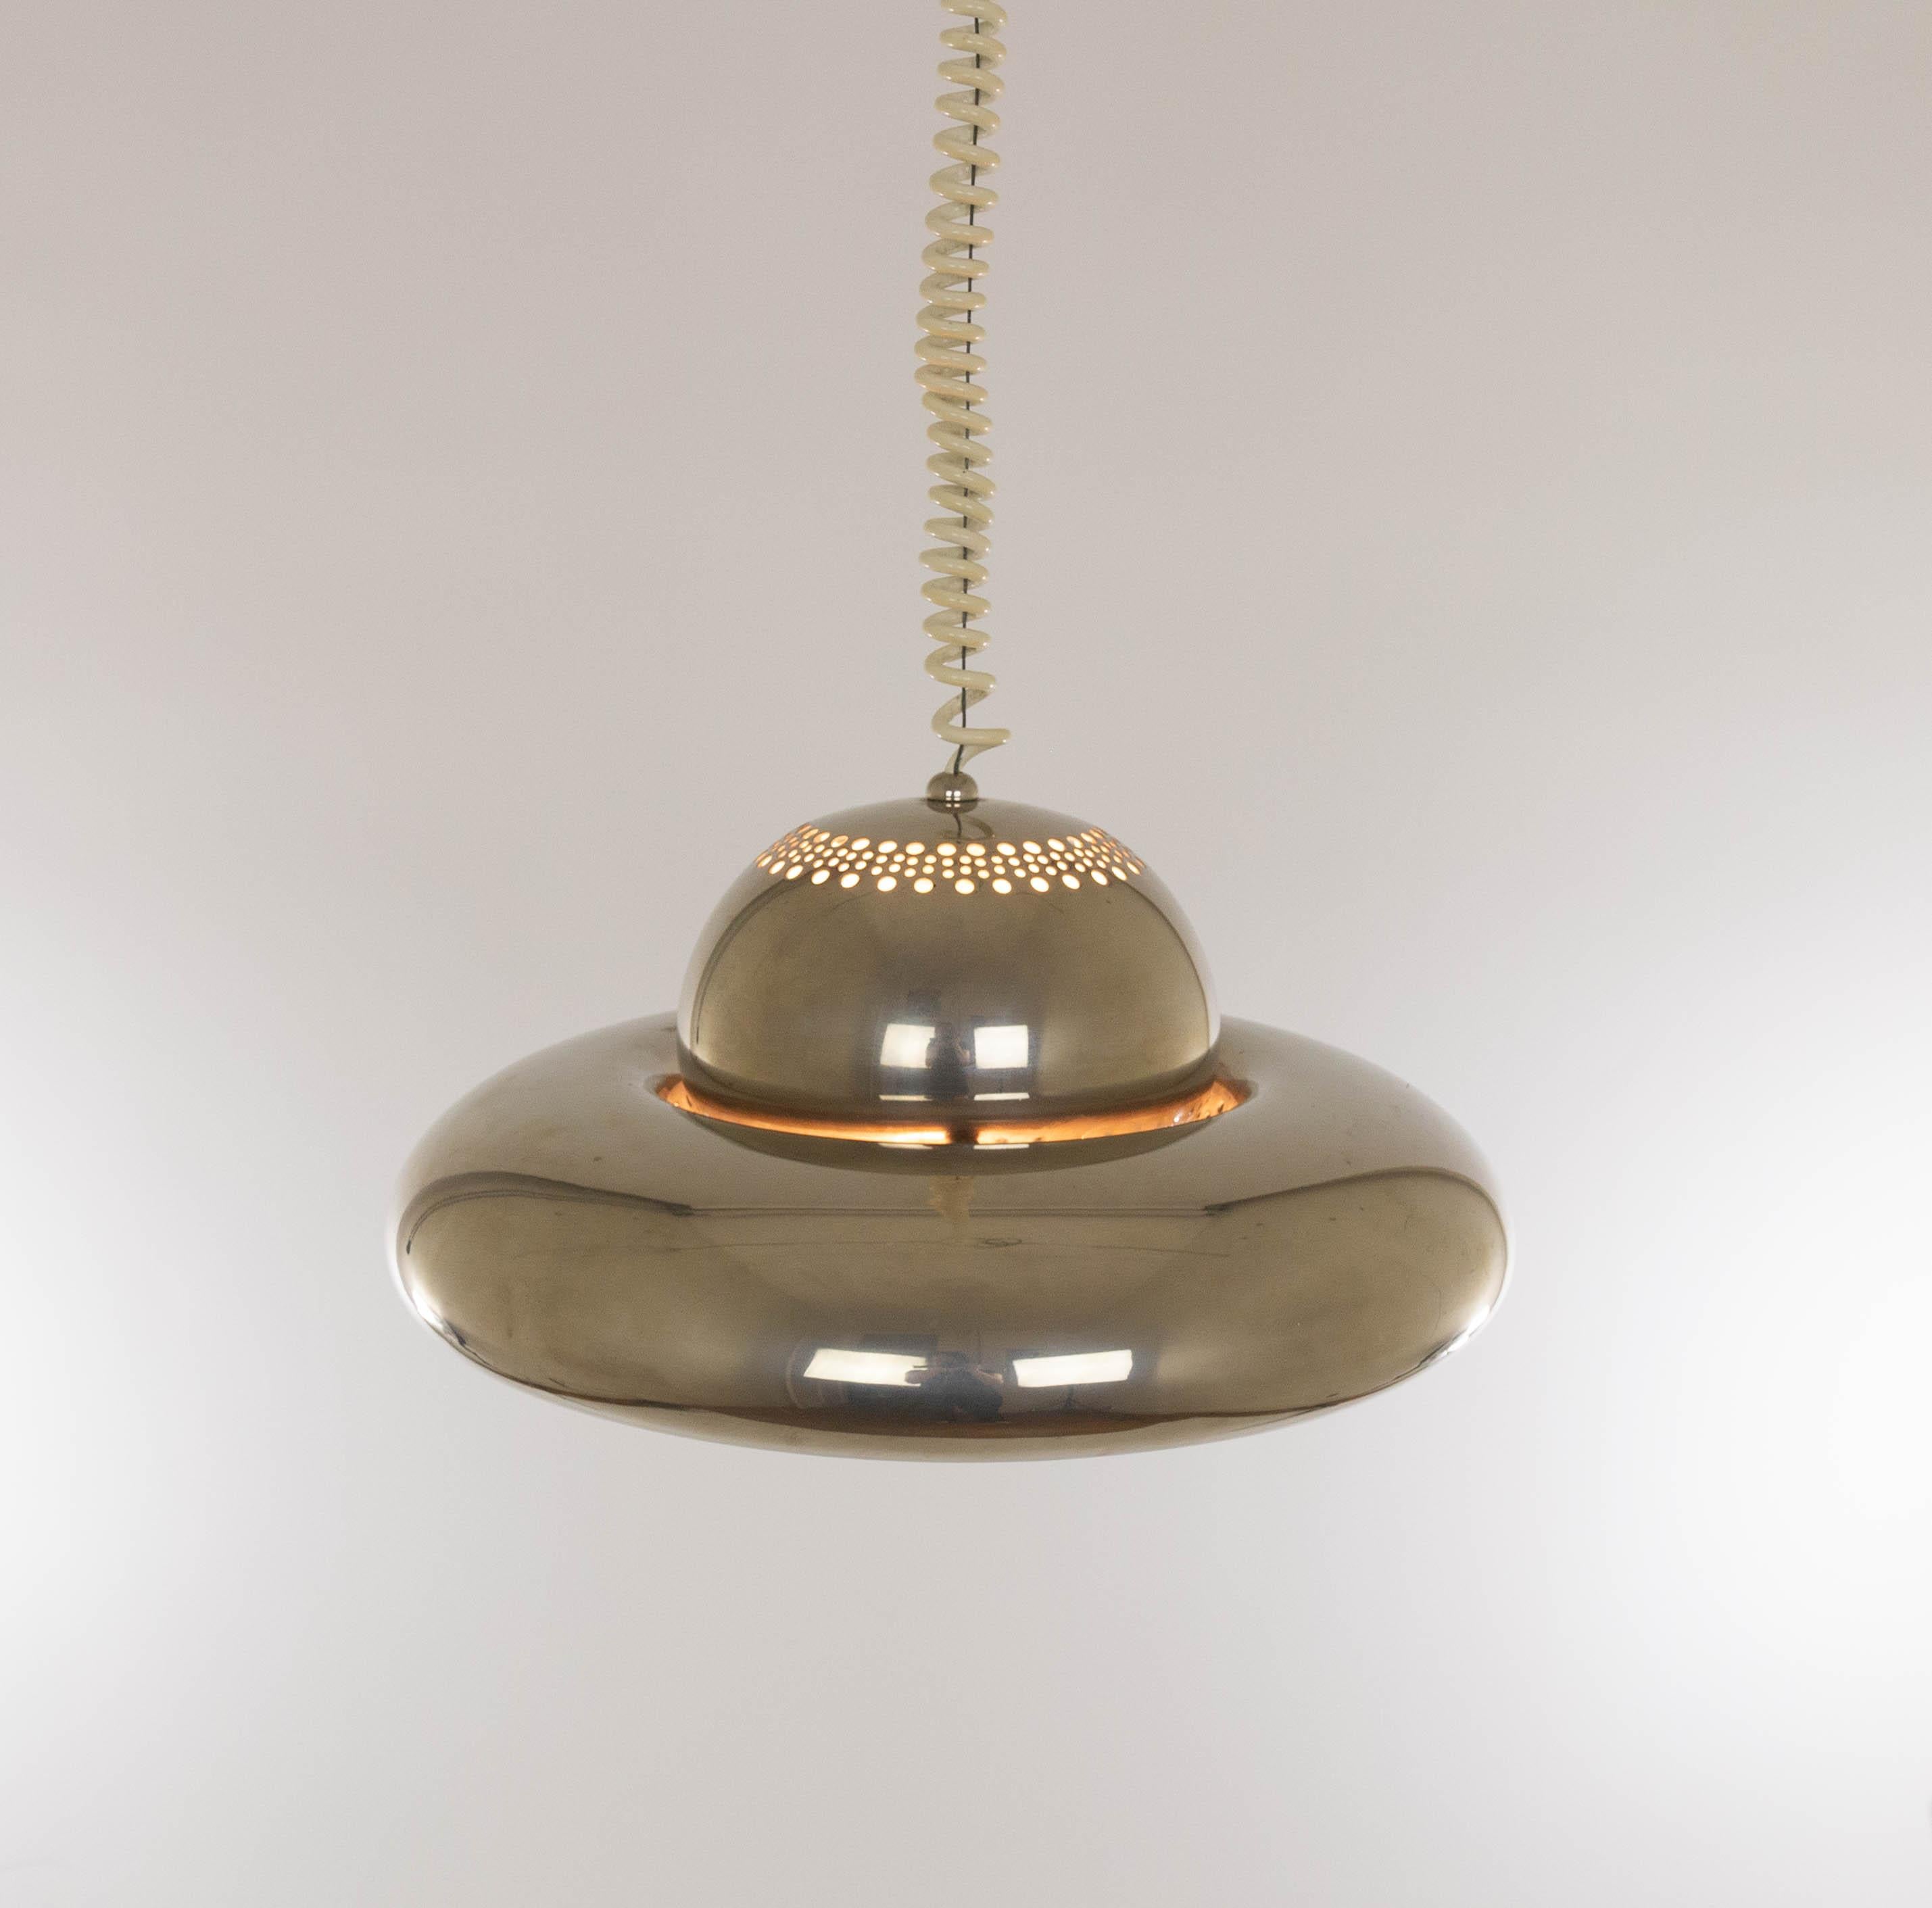 Nickel-plated Fior di Loto pendant designed by Tobia and Afra Scarpa for Italian Lighting manufacturer Flos in 1963.

In an original Flos catalogue we found this description: 